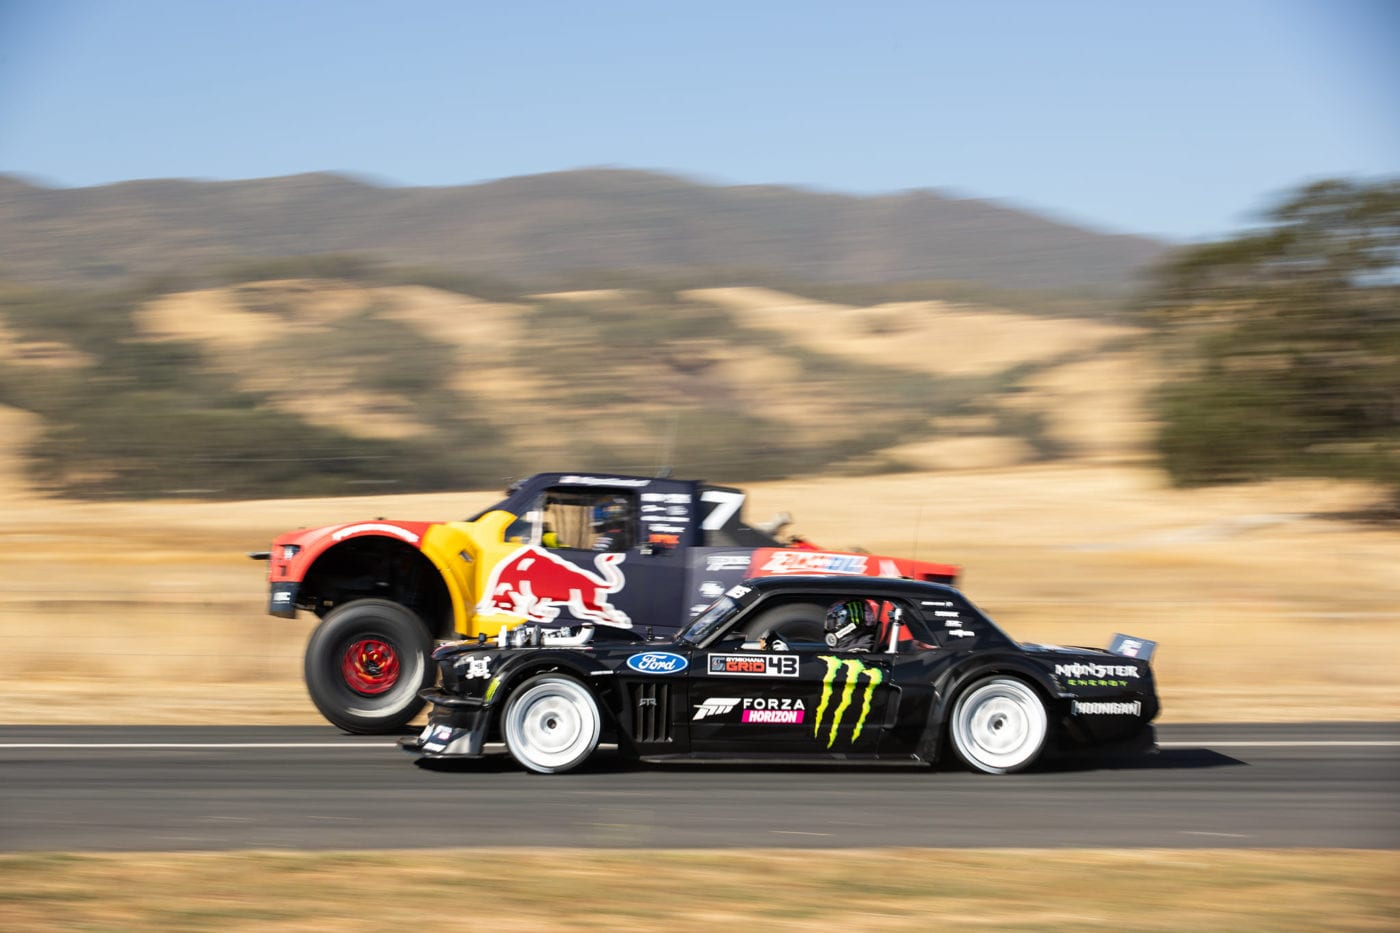 Not even a Trophy Truck can beat the Hoonicorn Mustang